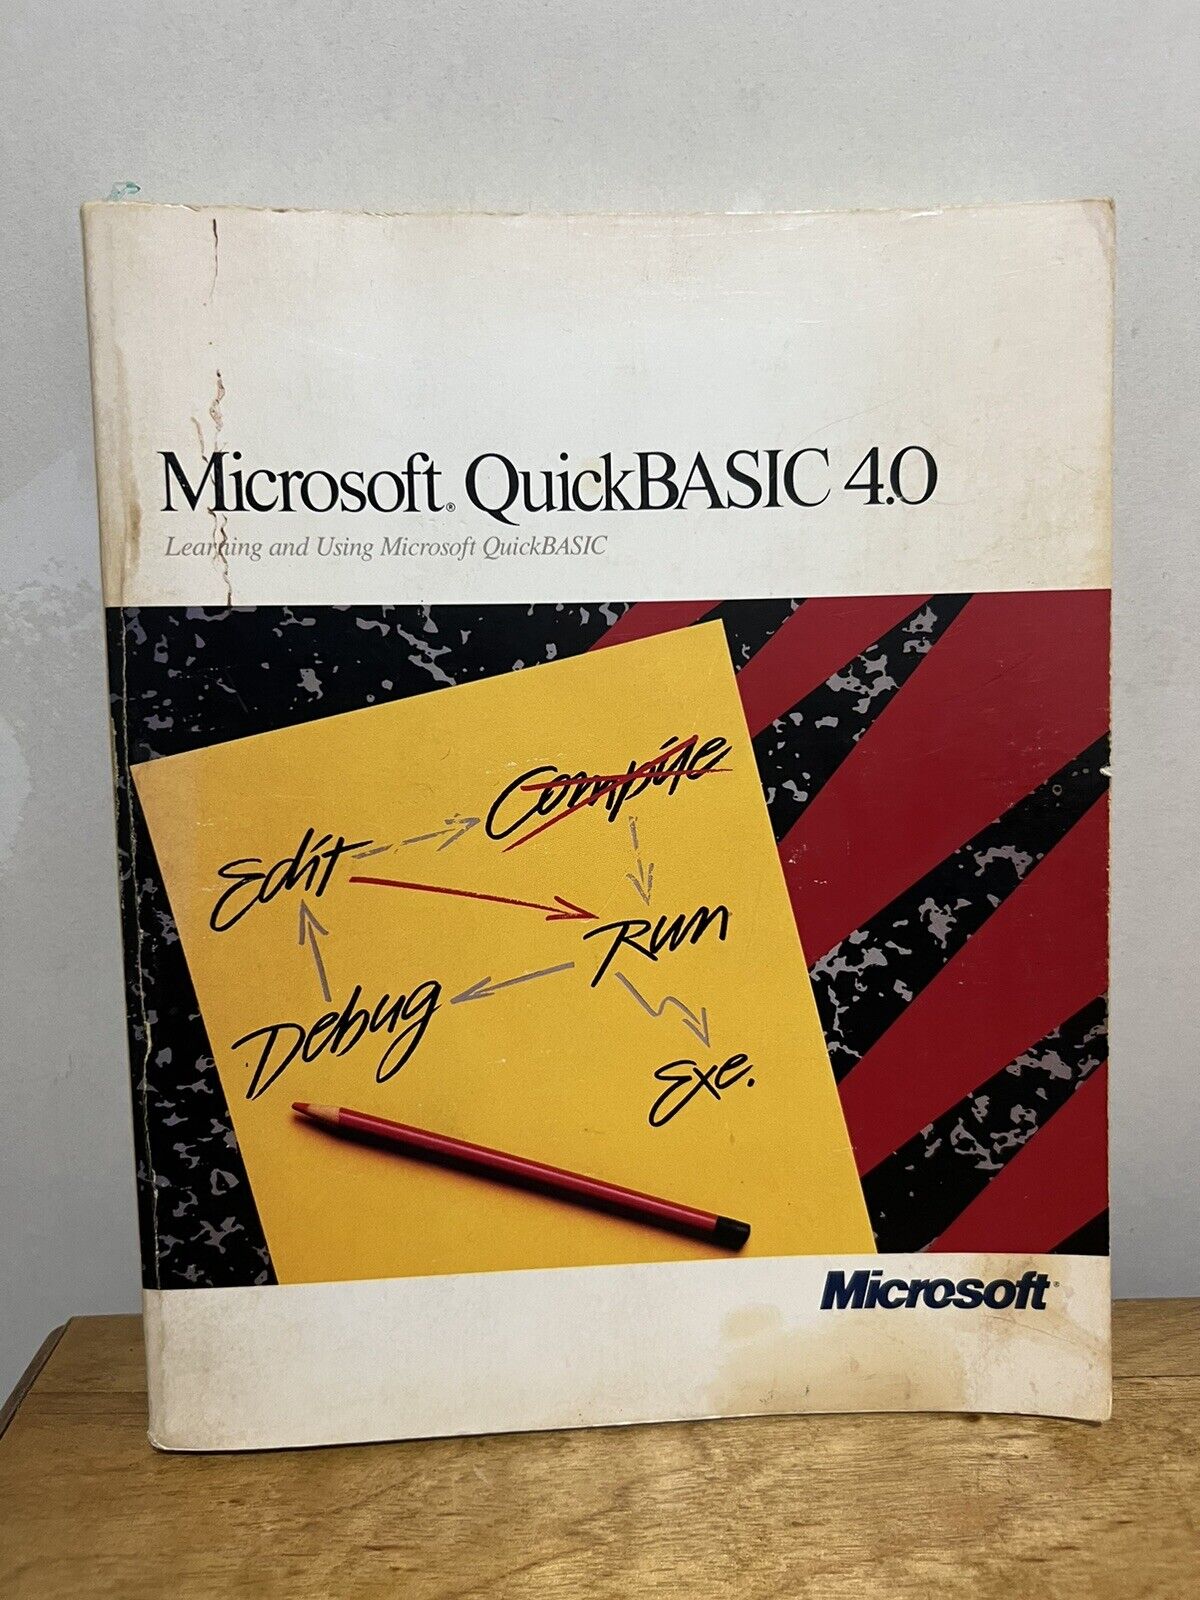 Vintage Microsoft QuickBASIC 4.0 1987 IBM PC Users Guide Book Manual